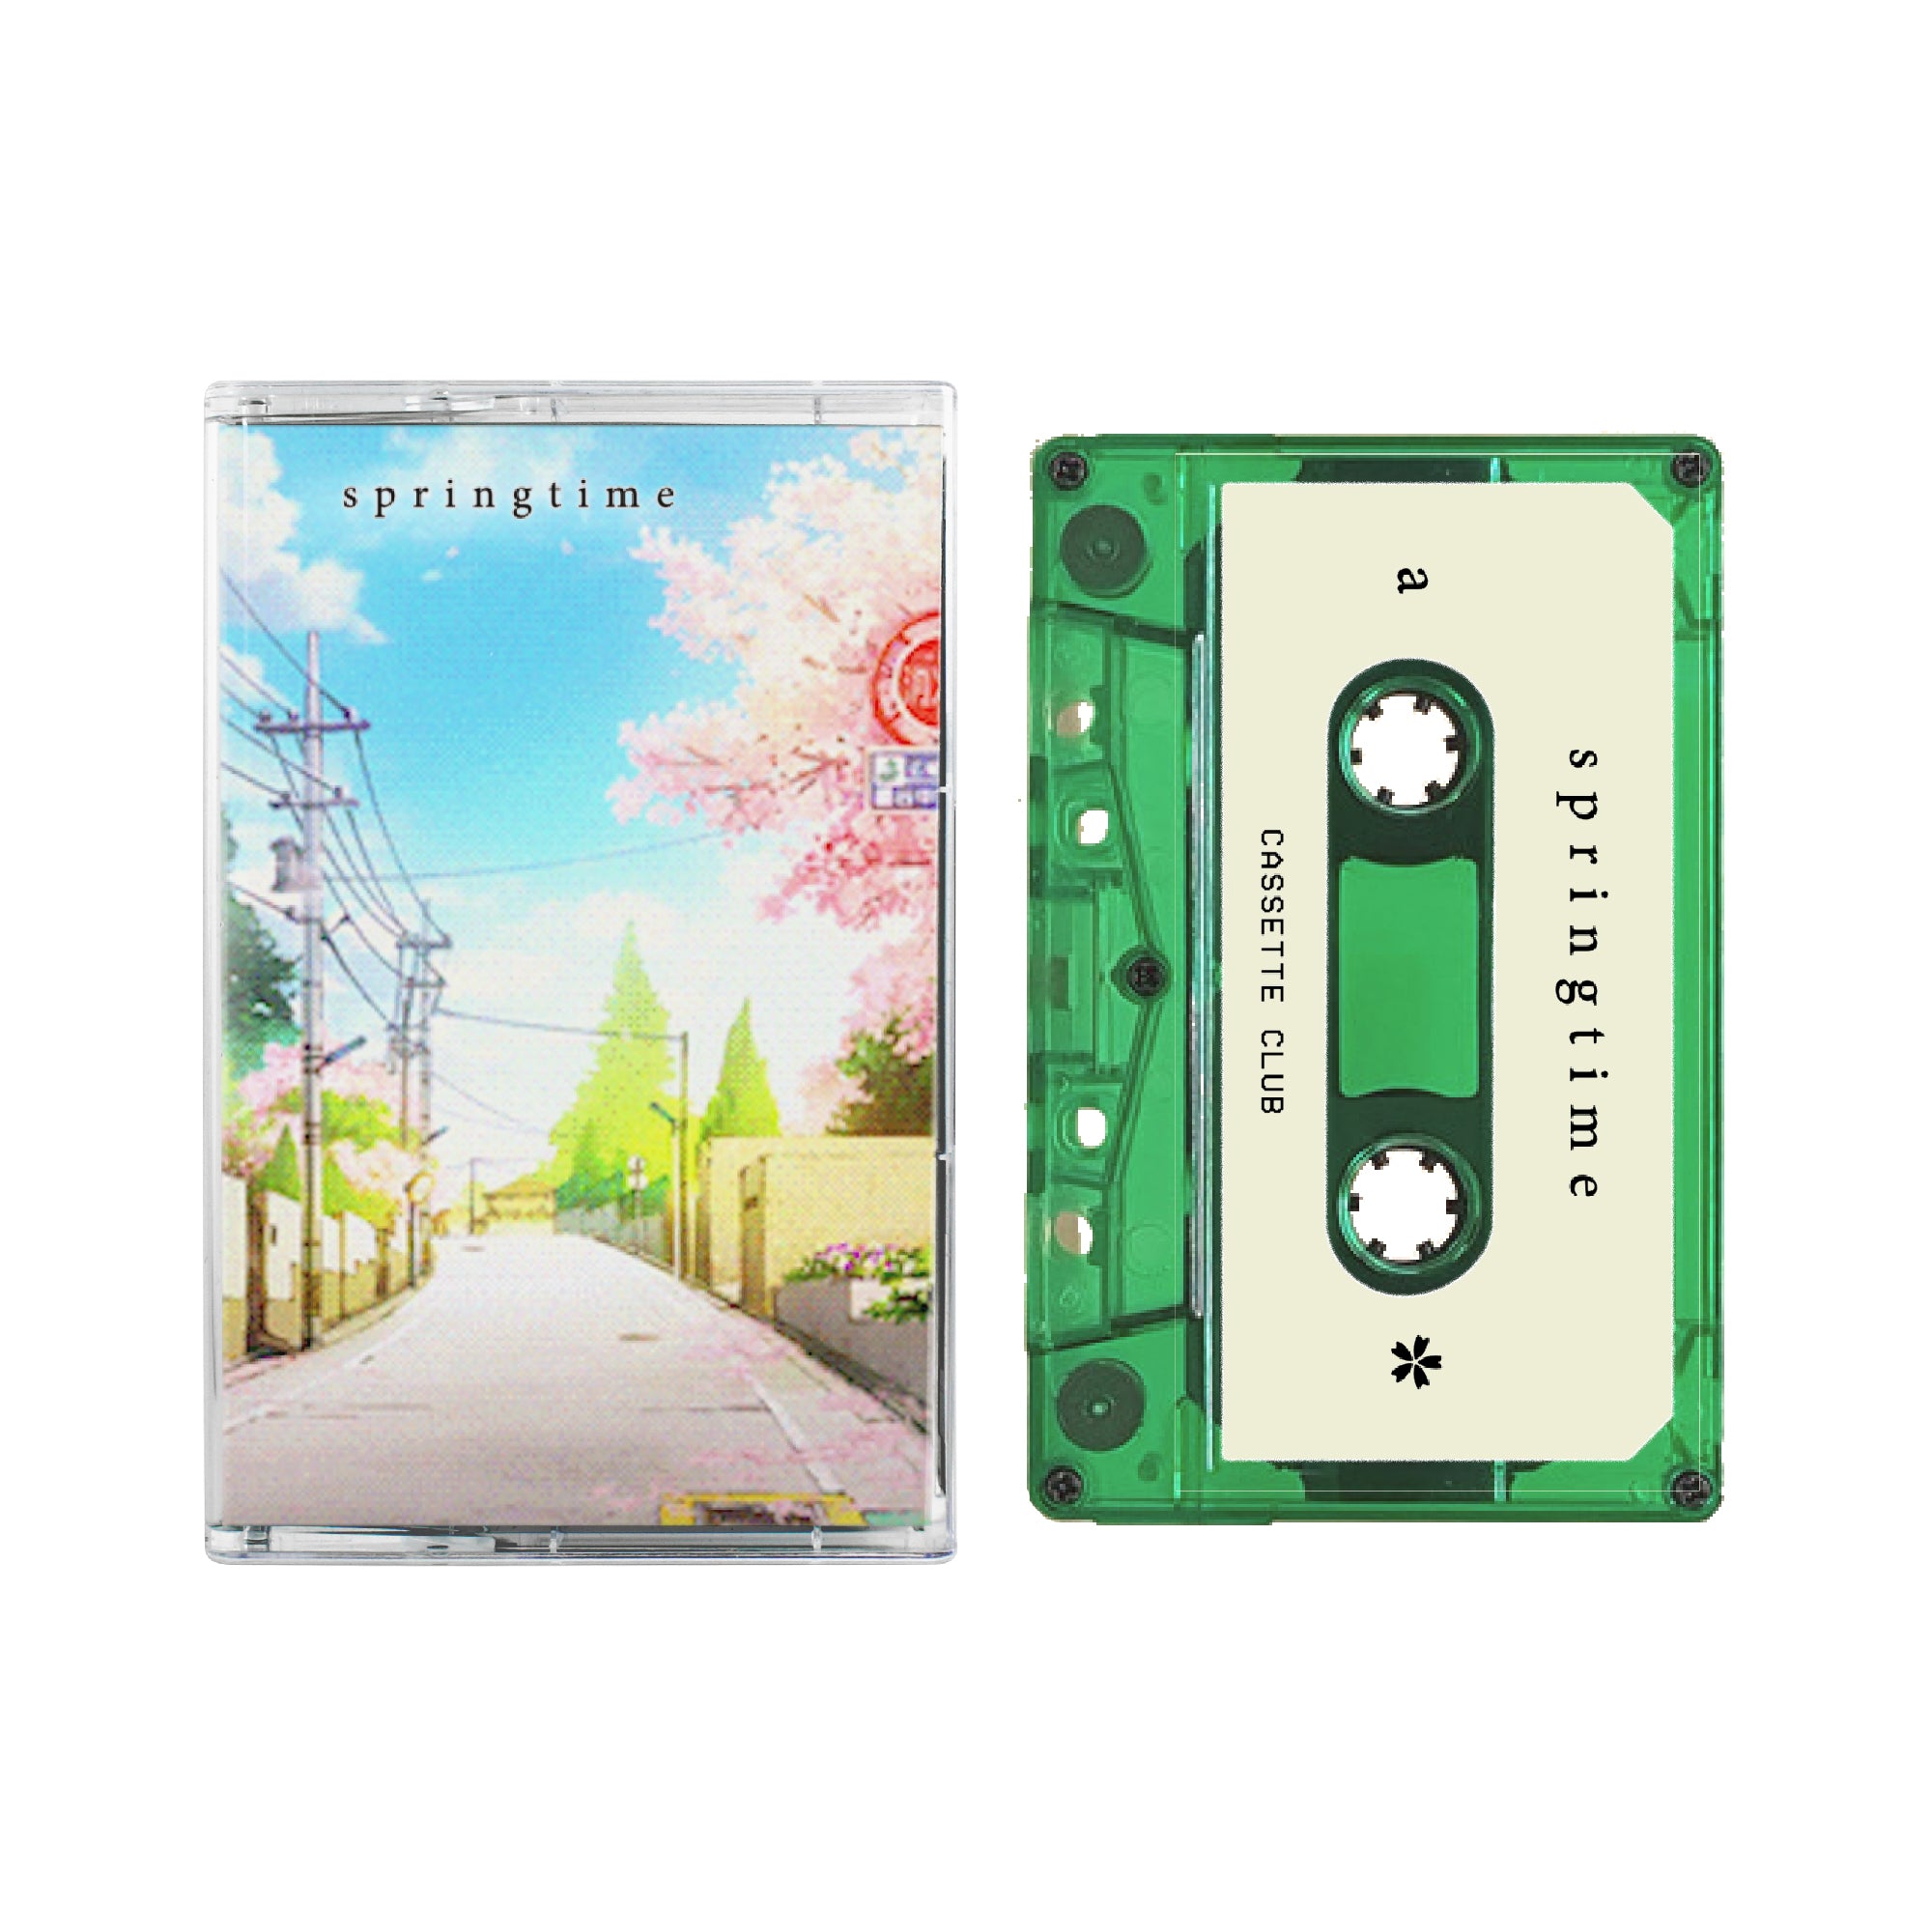 Finally bought my dream tape : r/cassetteculture